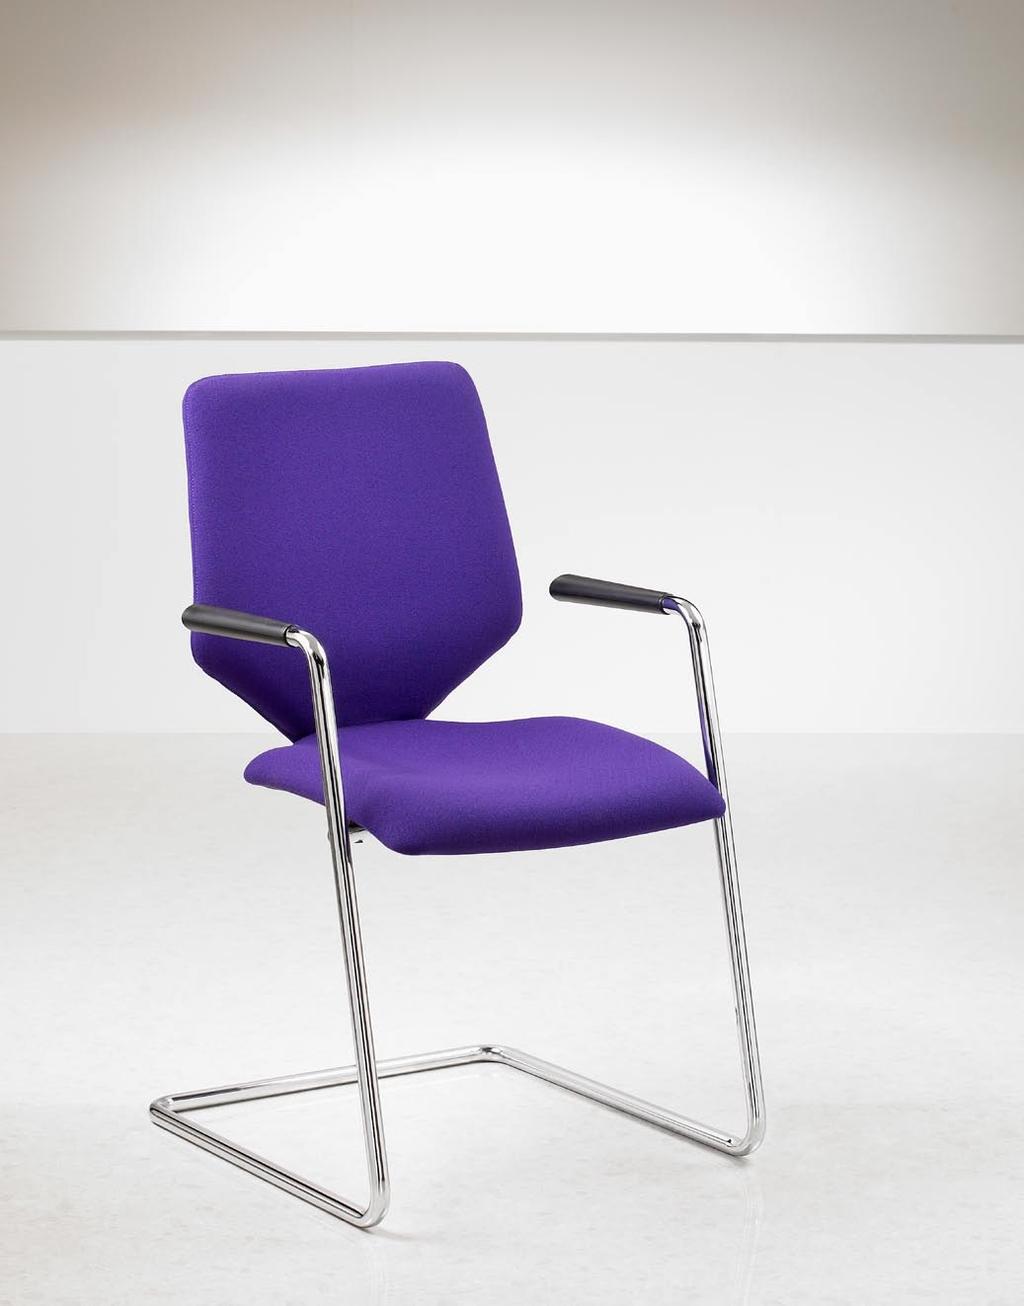 Meeting and Conference Chairs G4 Visitor/Conference Chair Design: Hilary Birkbeck A